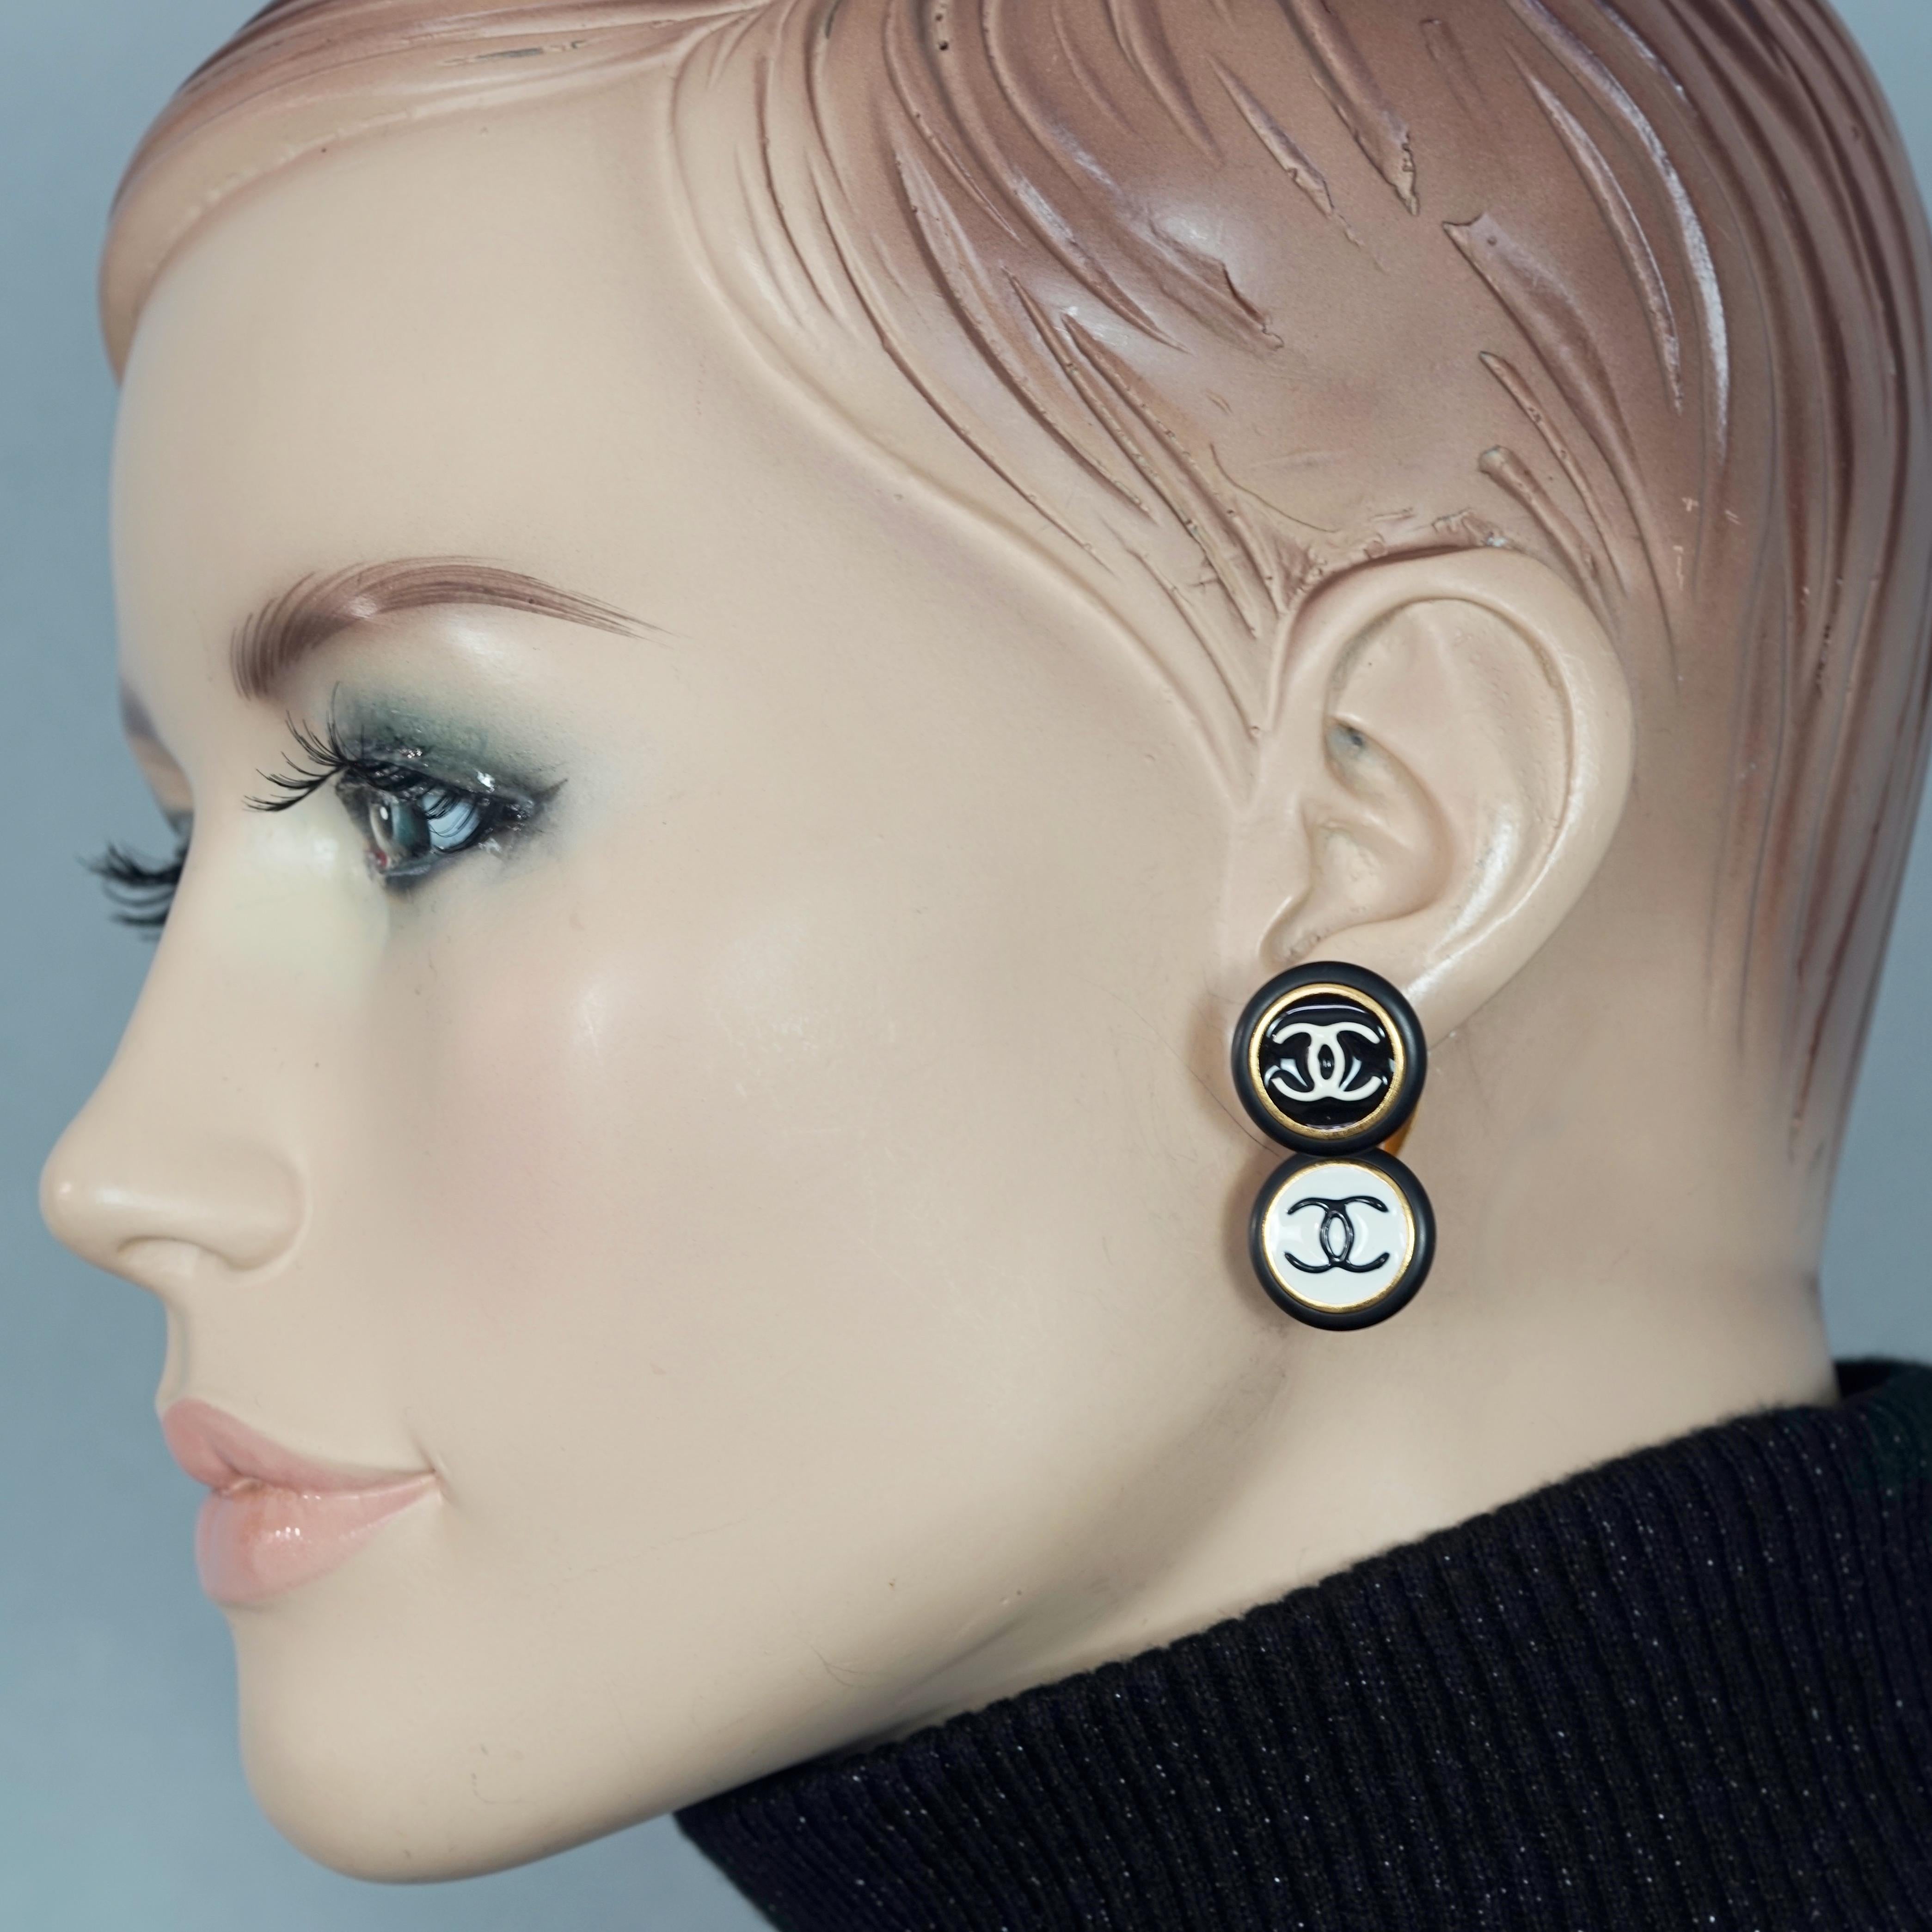 Vintage 1995 CHANEL Logo Double Disc Black and White Enamel Earrings

Measurements:
Height: 1.34 inches (3.4 cm)
Width: 0.71 inch (1.8 cm)
Weight per Earring: 11 grams

Features:
- 100% Authentic CHANEL.
- Double disc black and white enamel CC